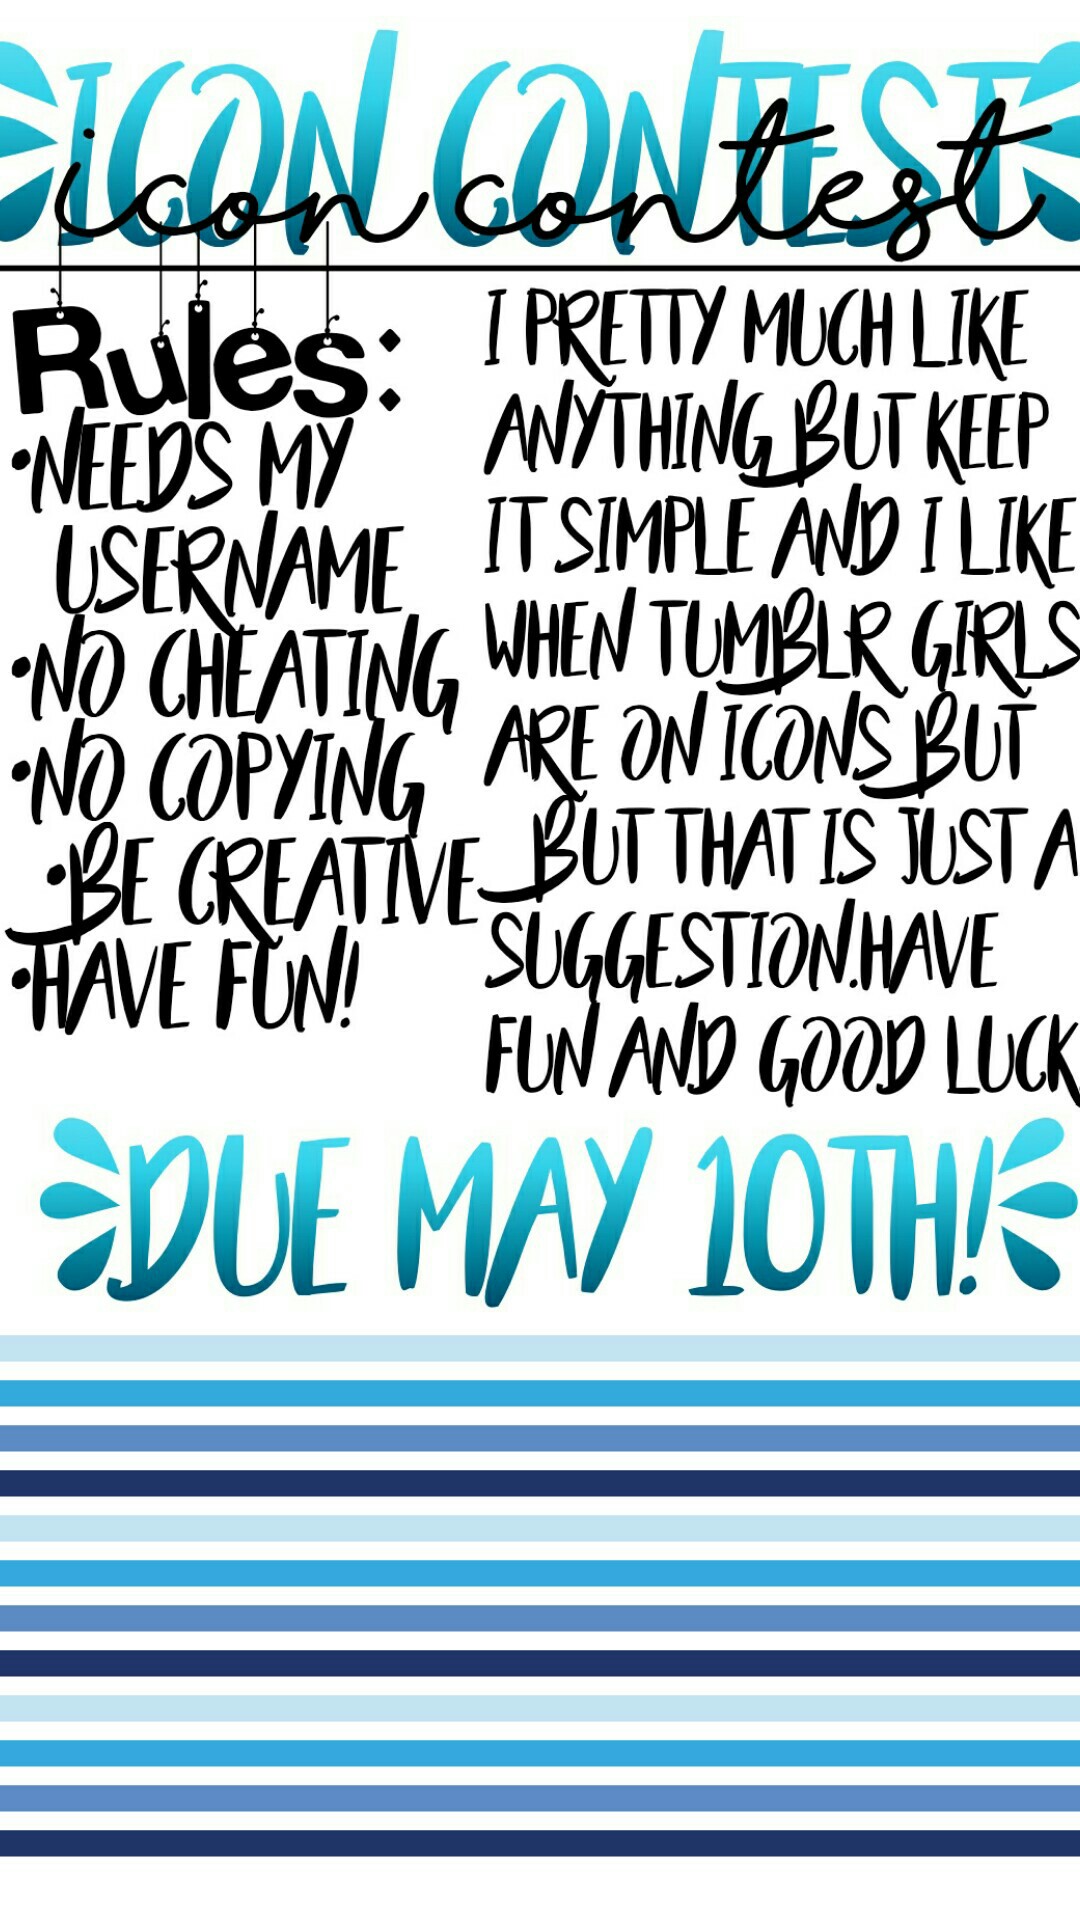 💙Tap💙








Sorry for the terrible layout!! Icons are due on May 10th and good luck everyone! I can't wait to see all of the beautiful icons you all make💙